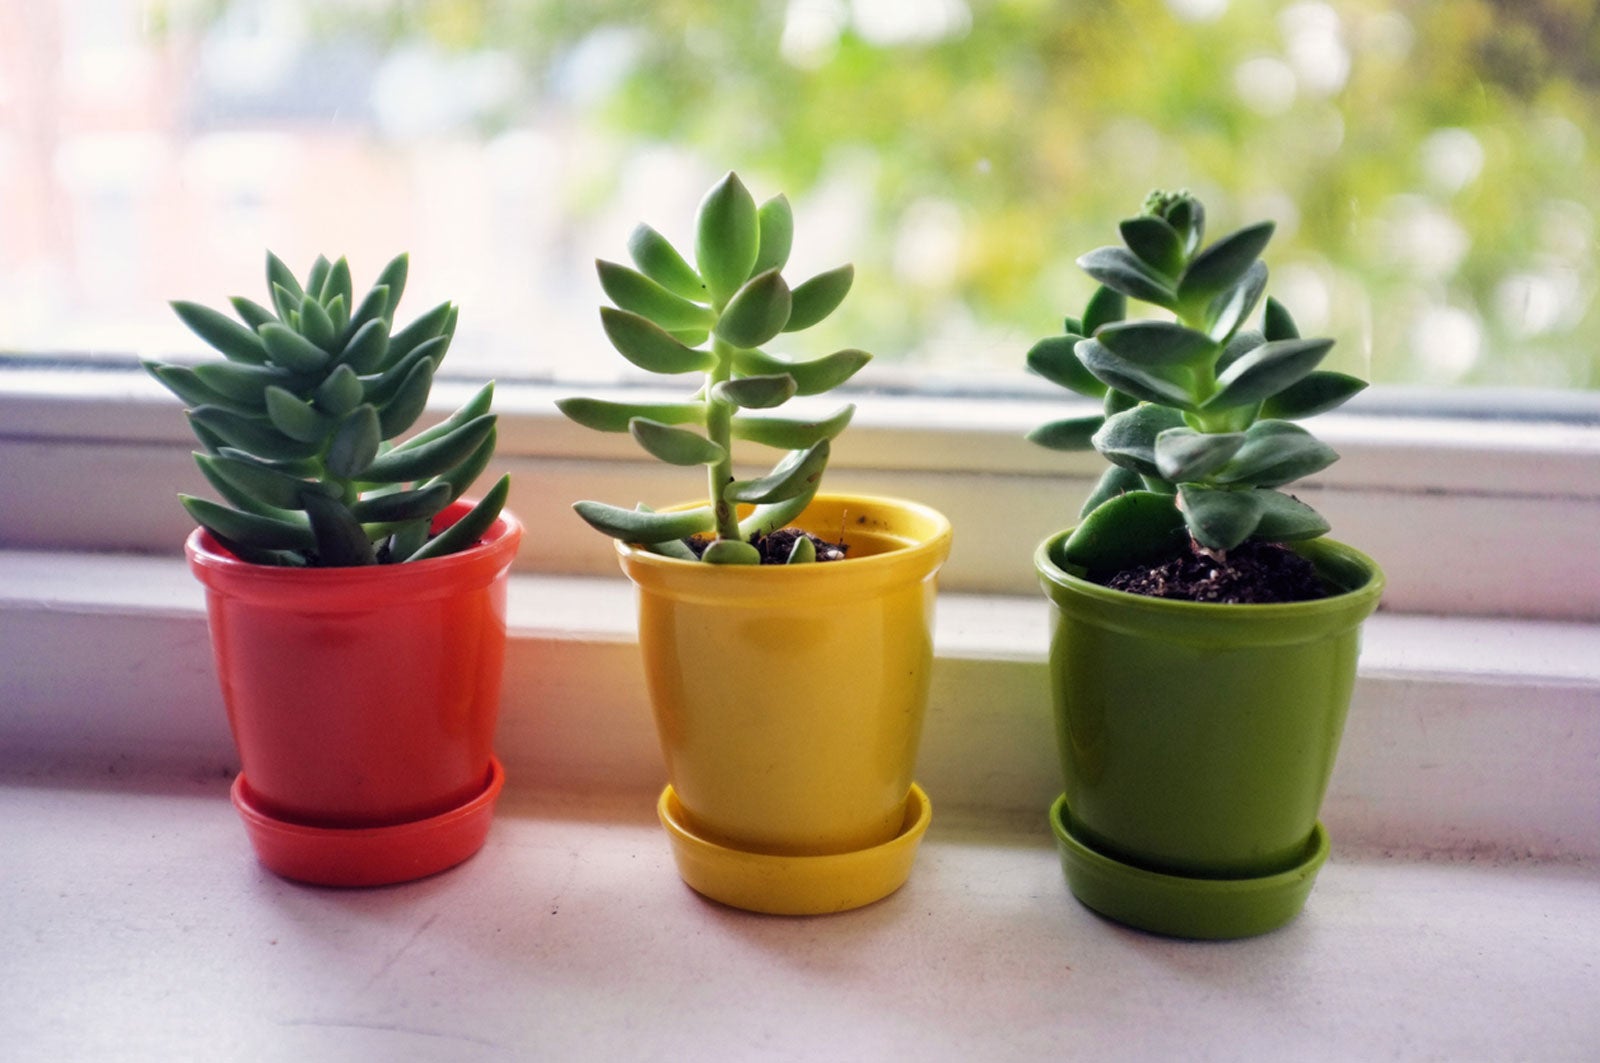 South-Facing Window Houseplants – Choosing Plants For South-Facing Windows  | Gardening Know How